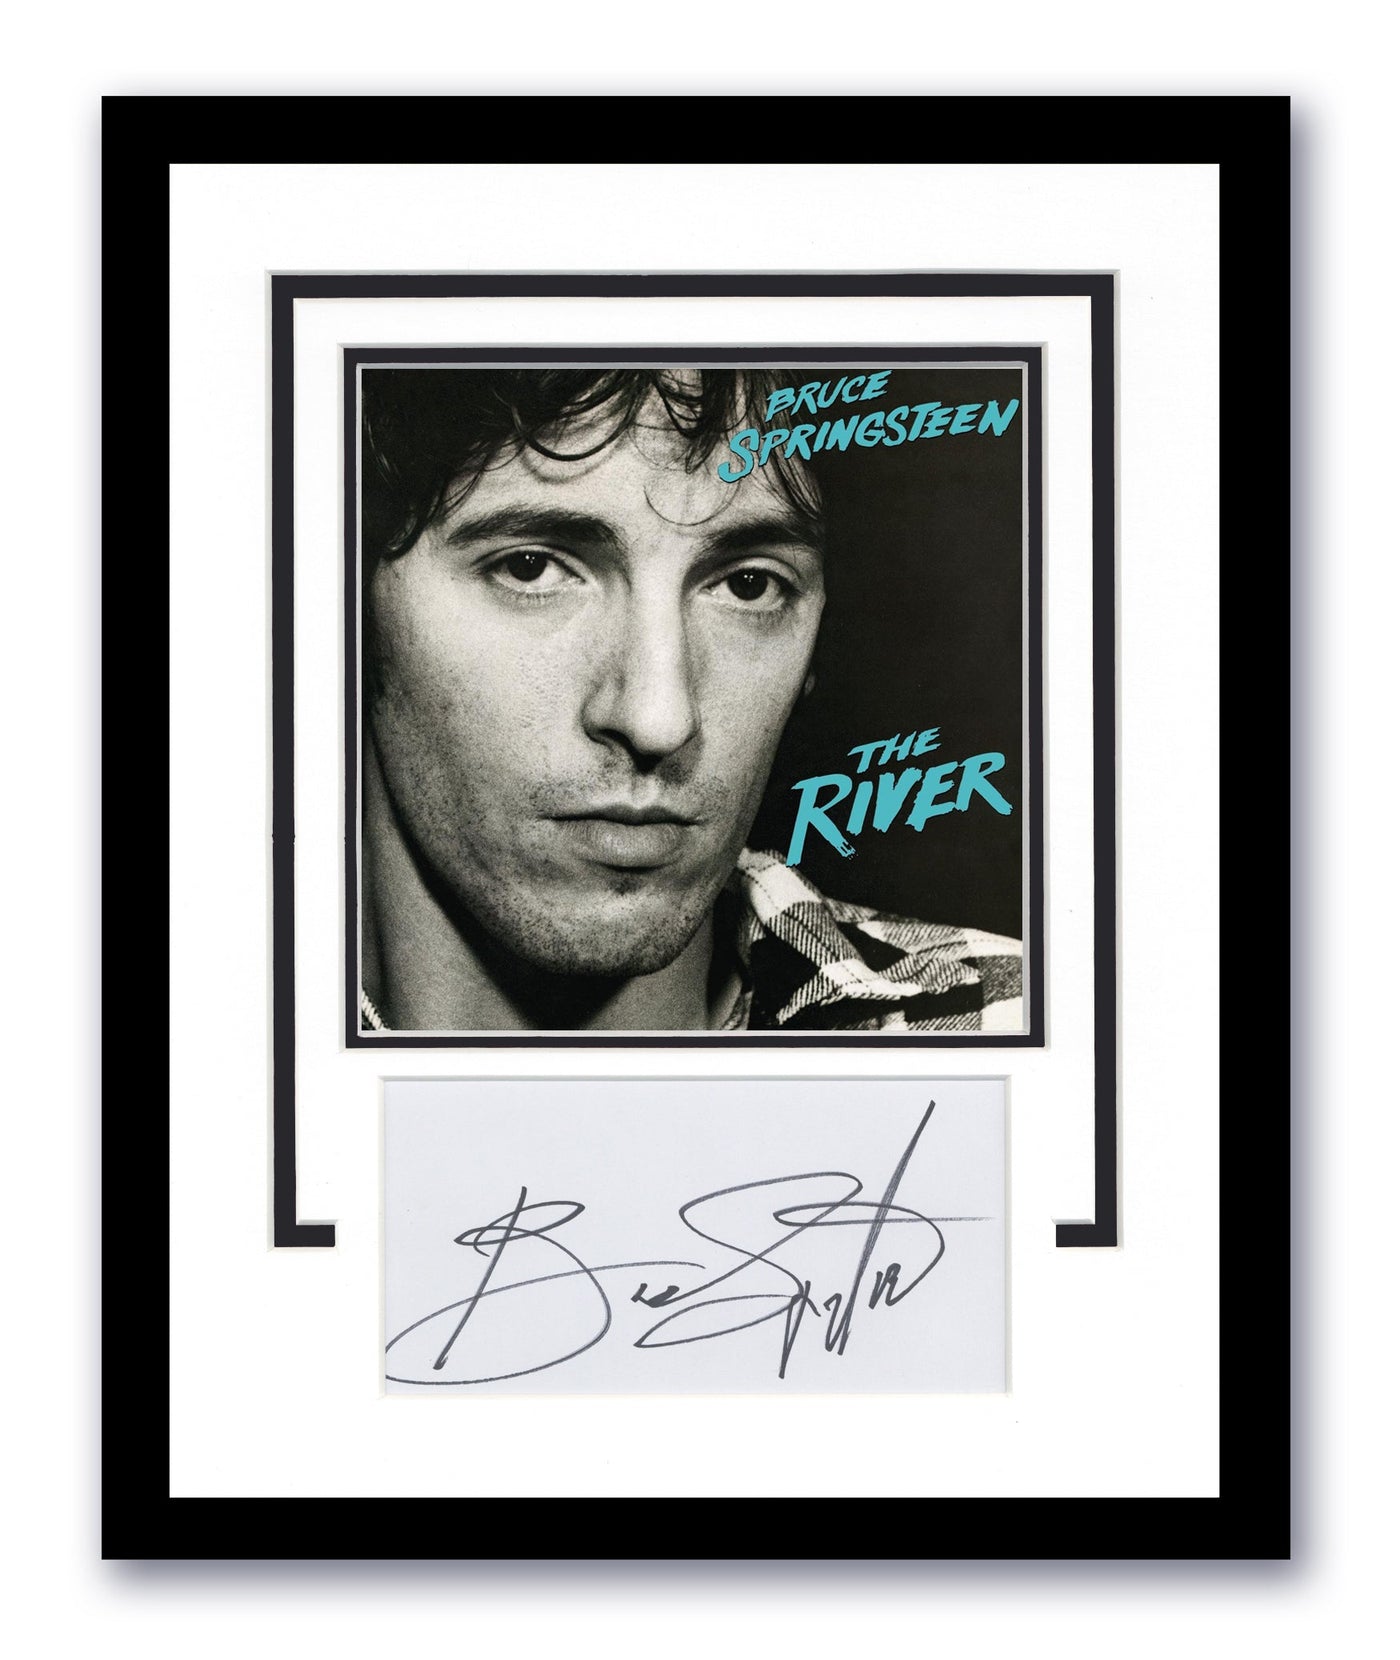 Bruce Springsteen Autographed Signed 11x14 Framed Photo The River ACOA